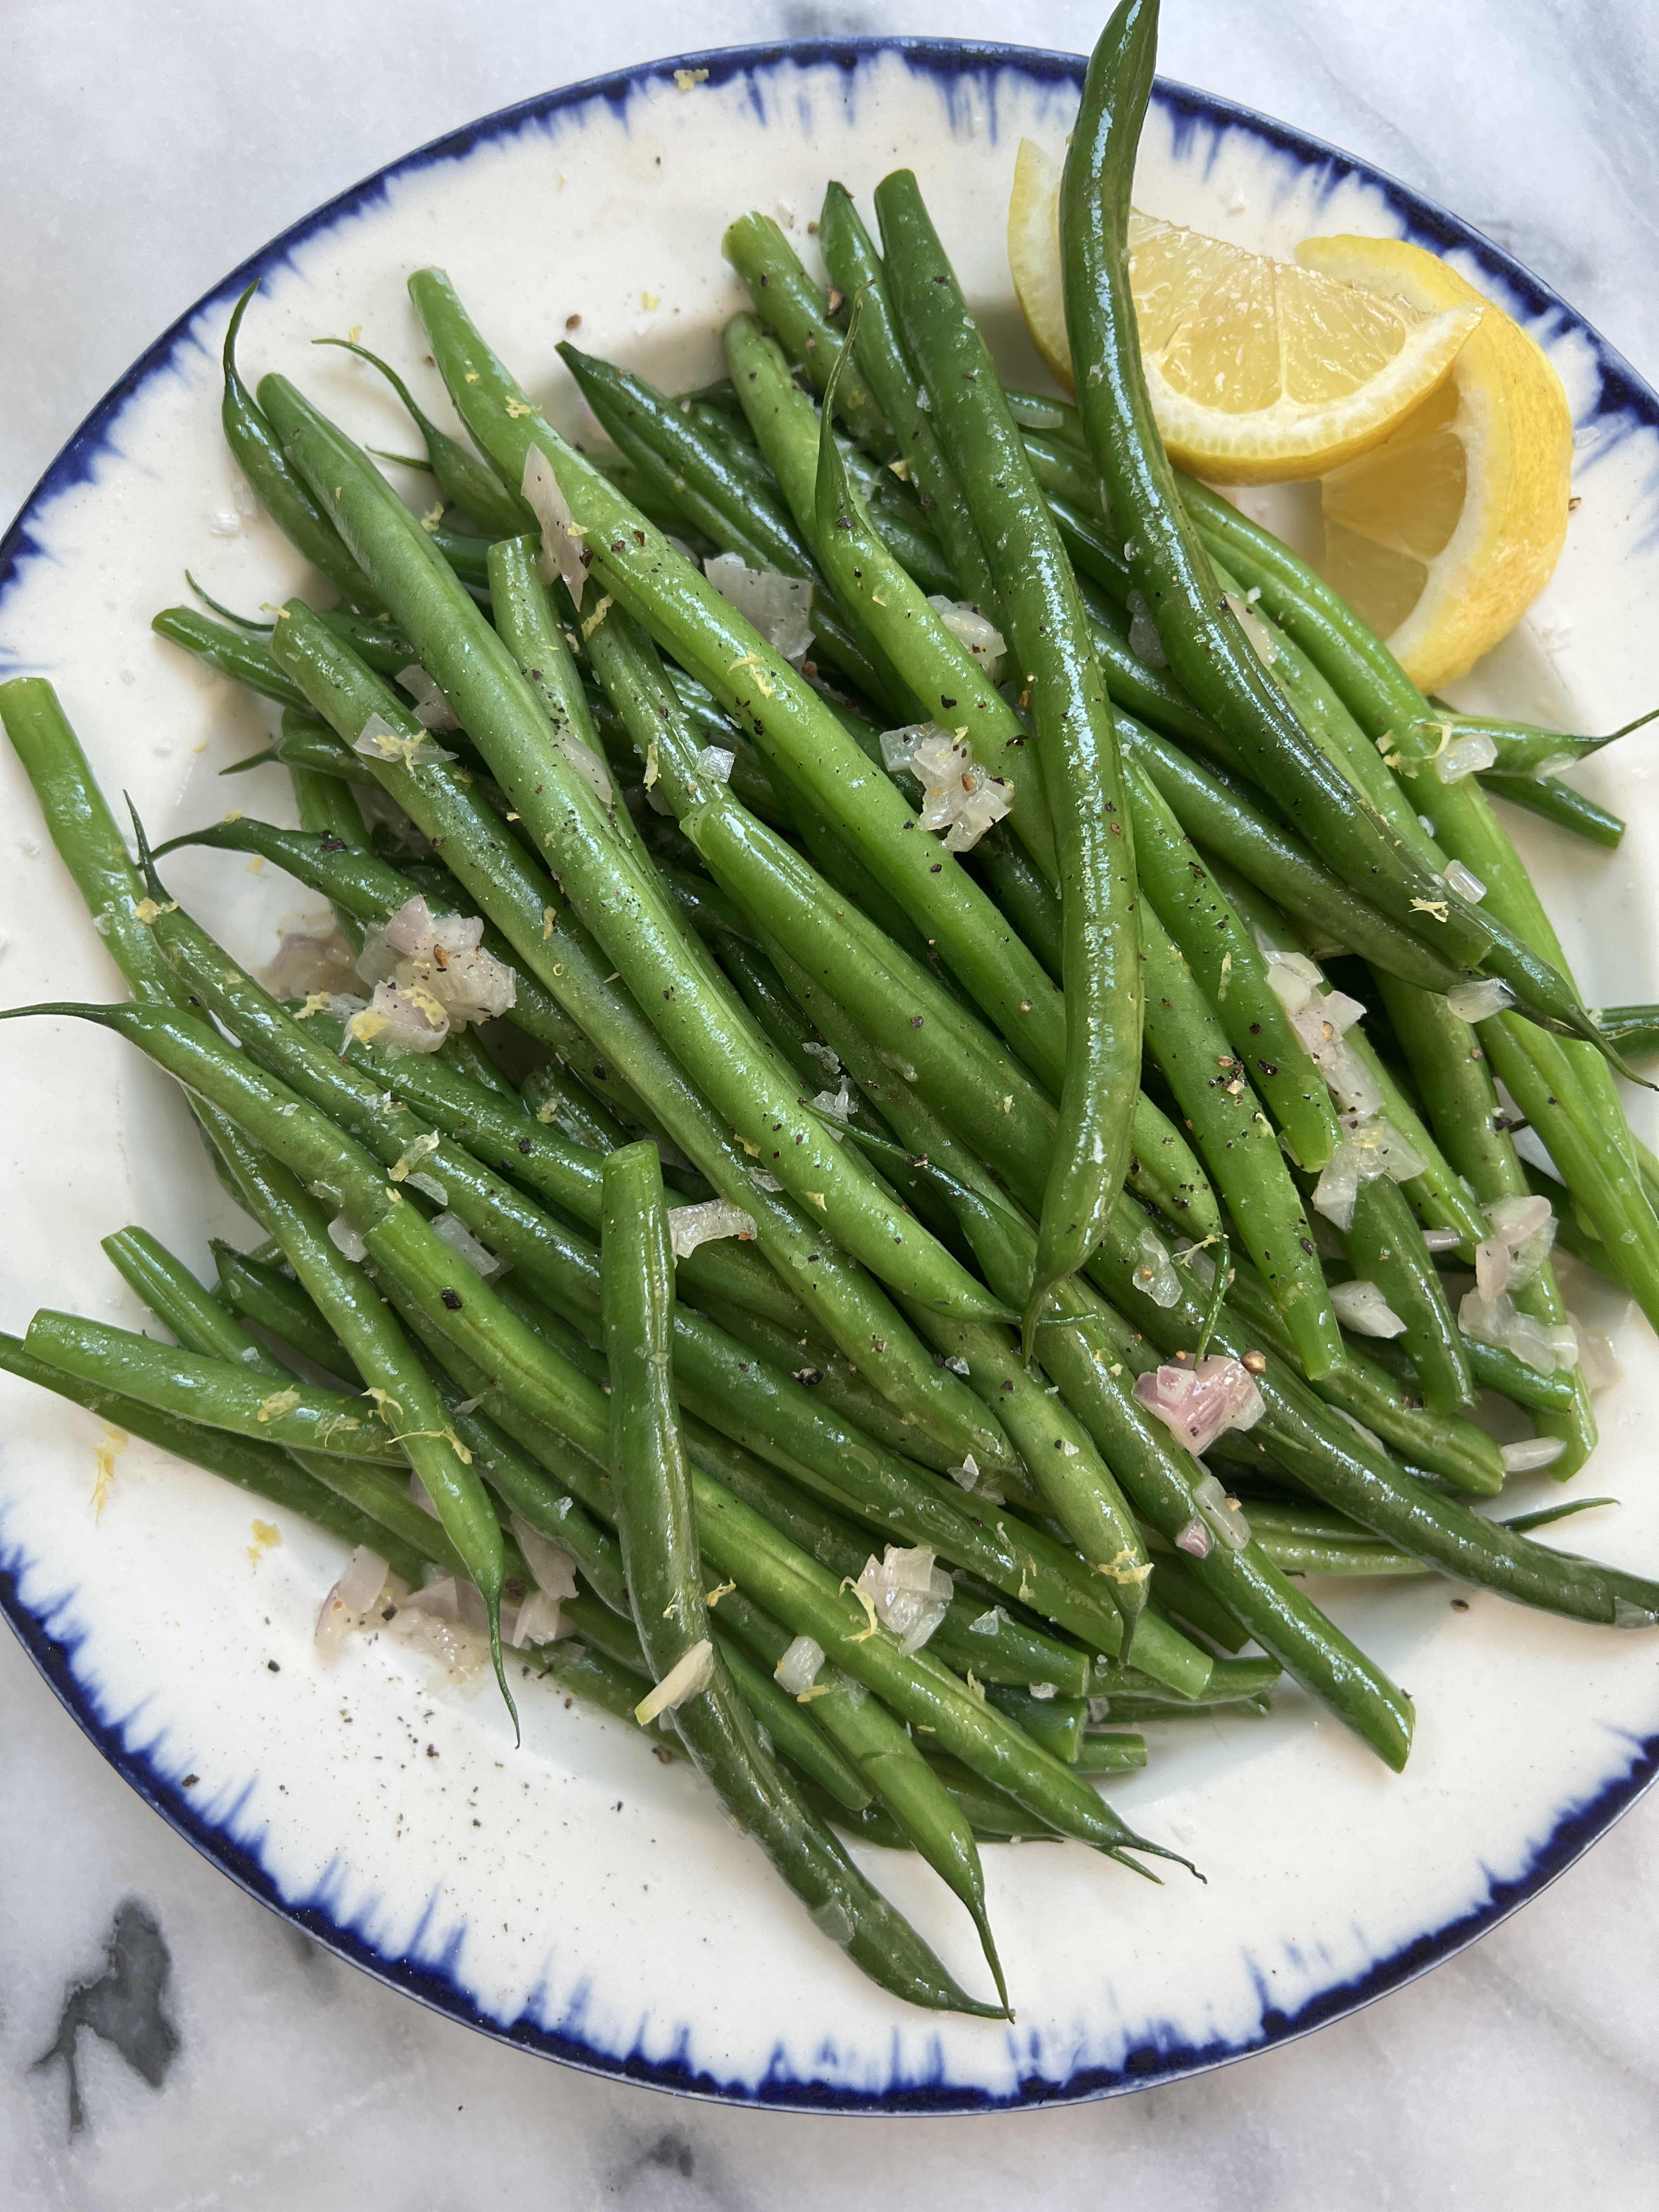 French Haricot Verts Recipe - I'd Rather Be A Chef